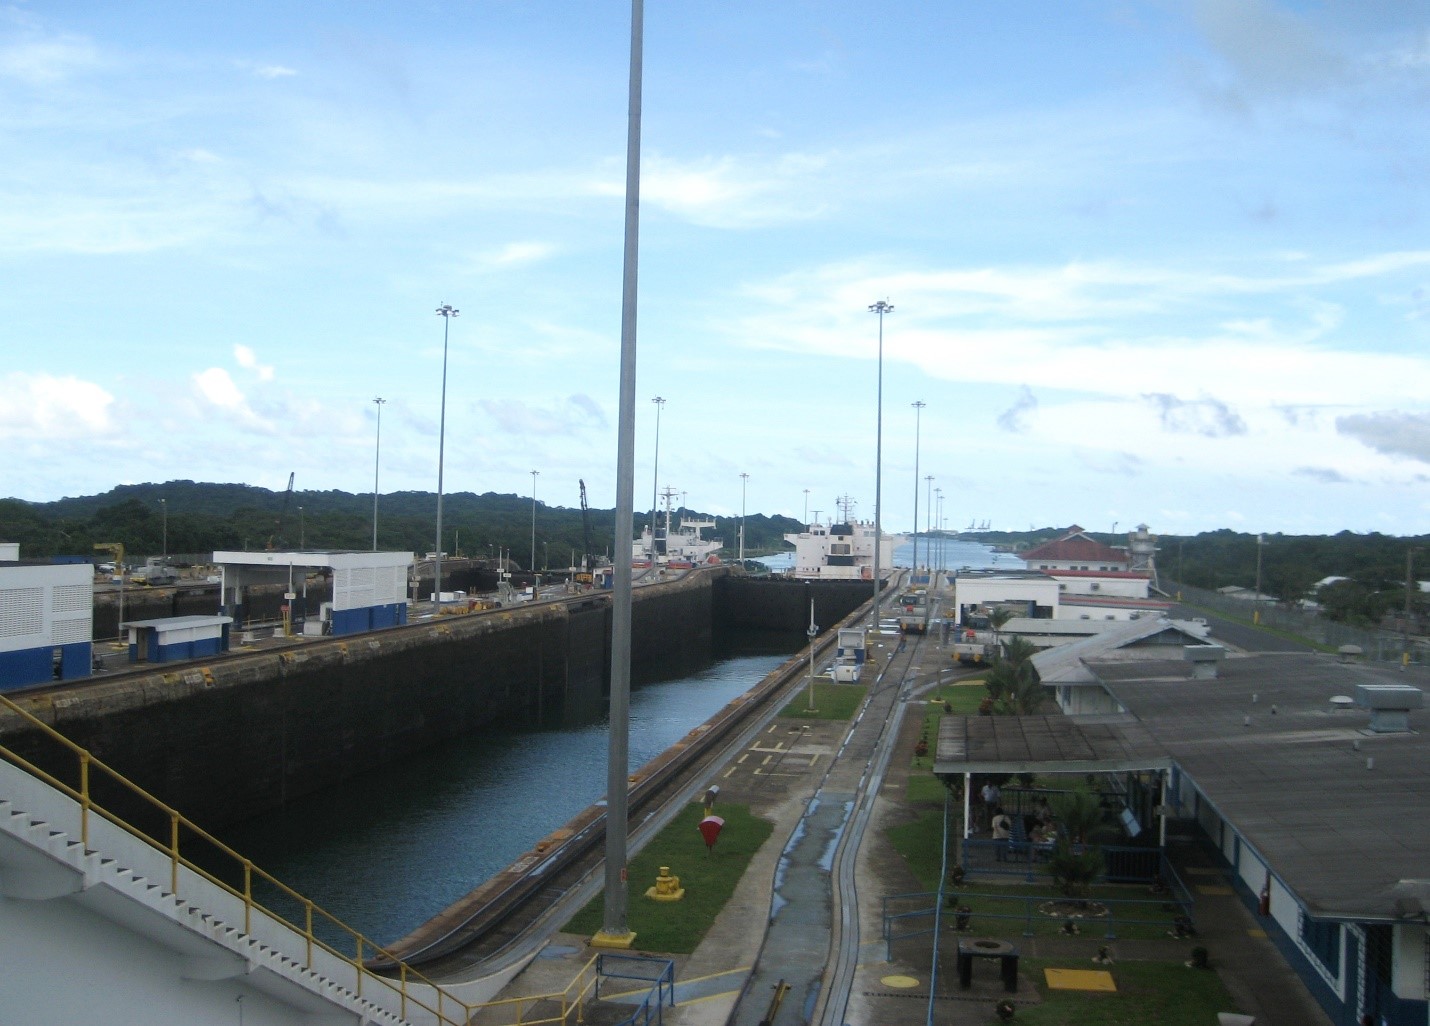 on Google Search for "Panama Canal"